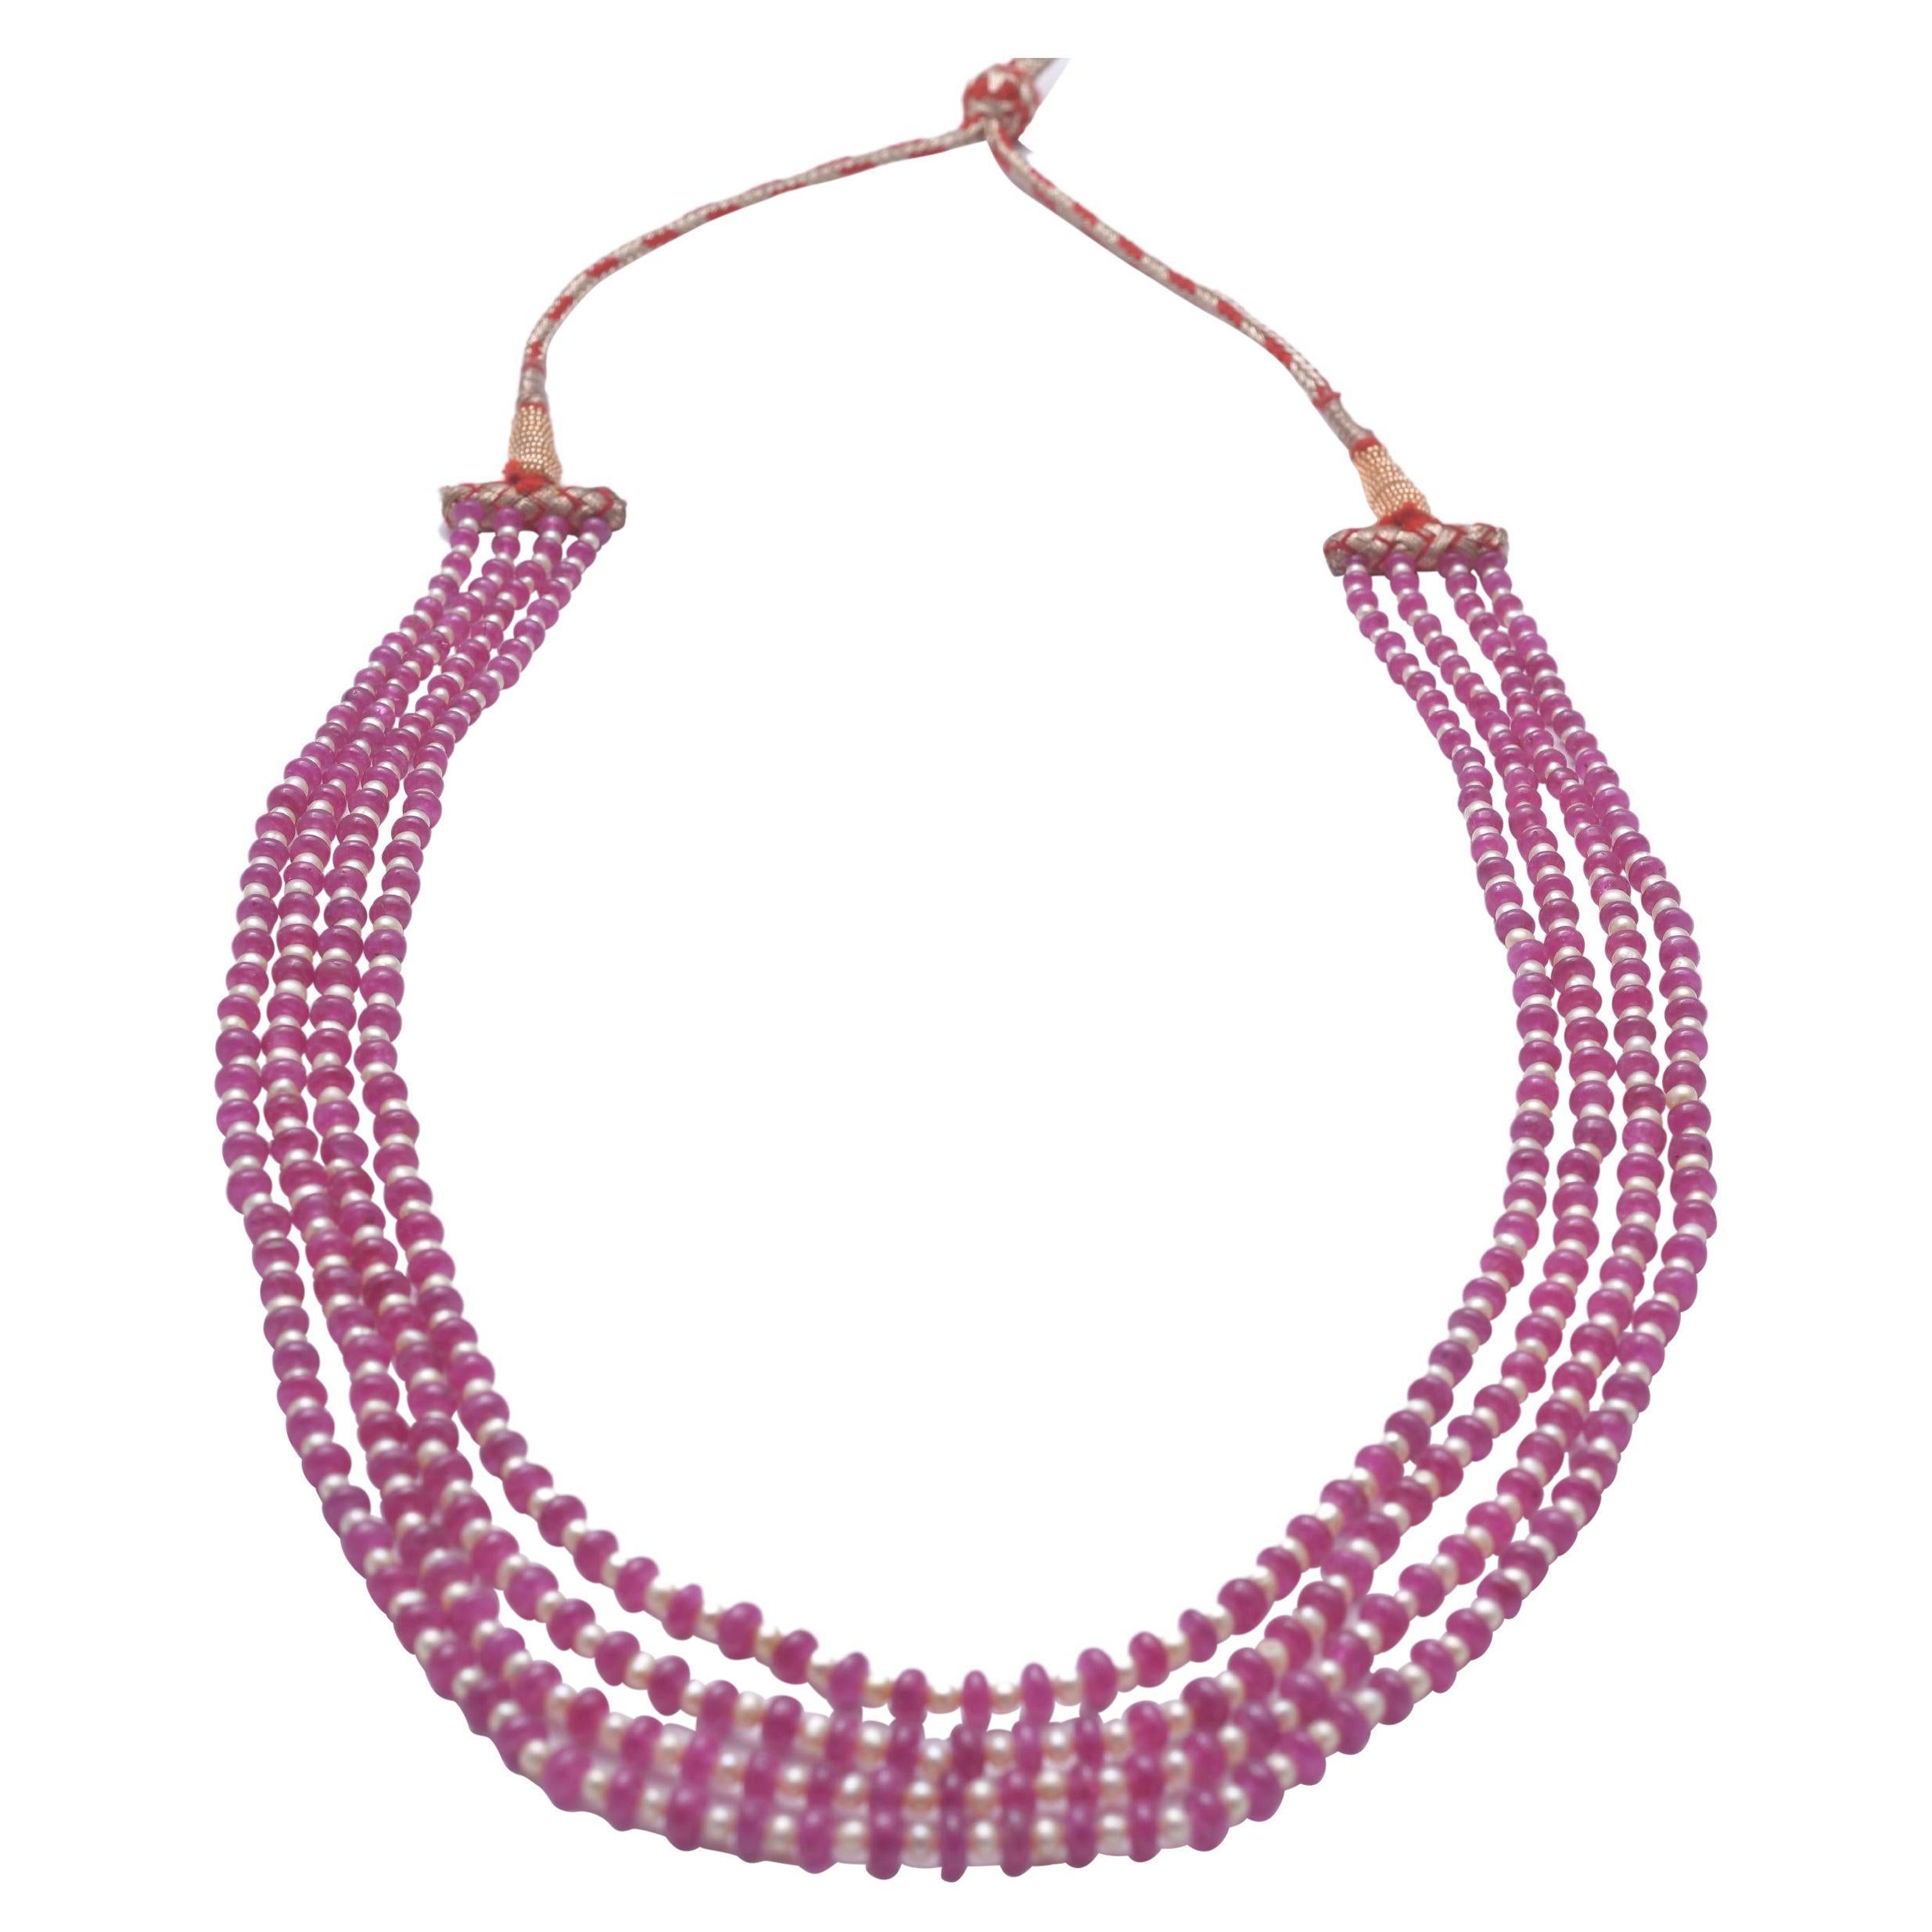 Ruby and pearl String Necklace